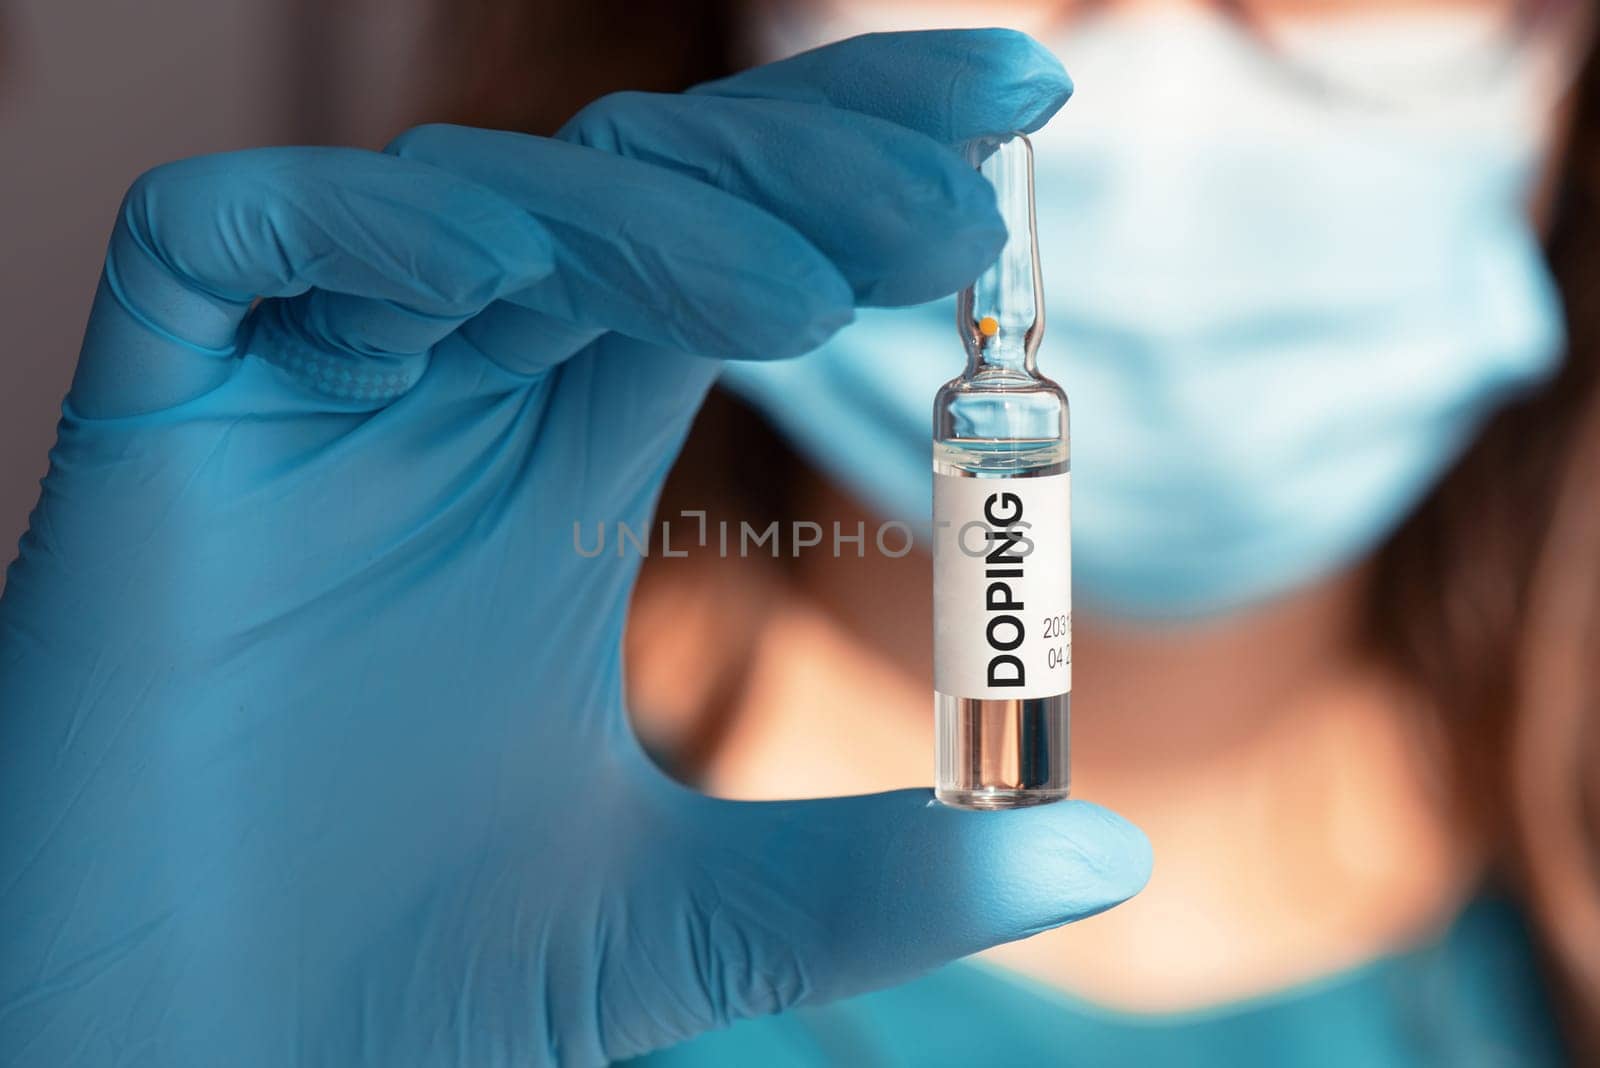 A doping ampoule in a nurse's hand by rusak